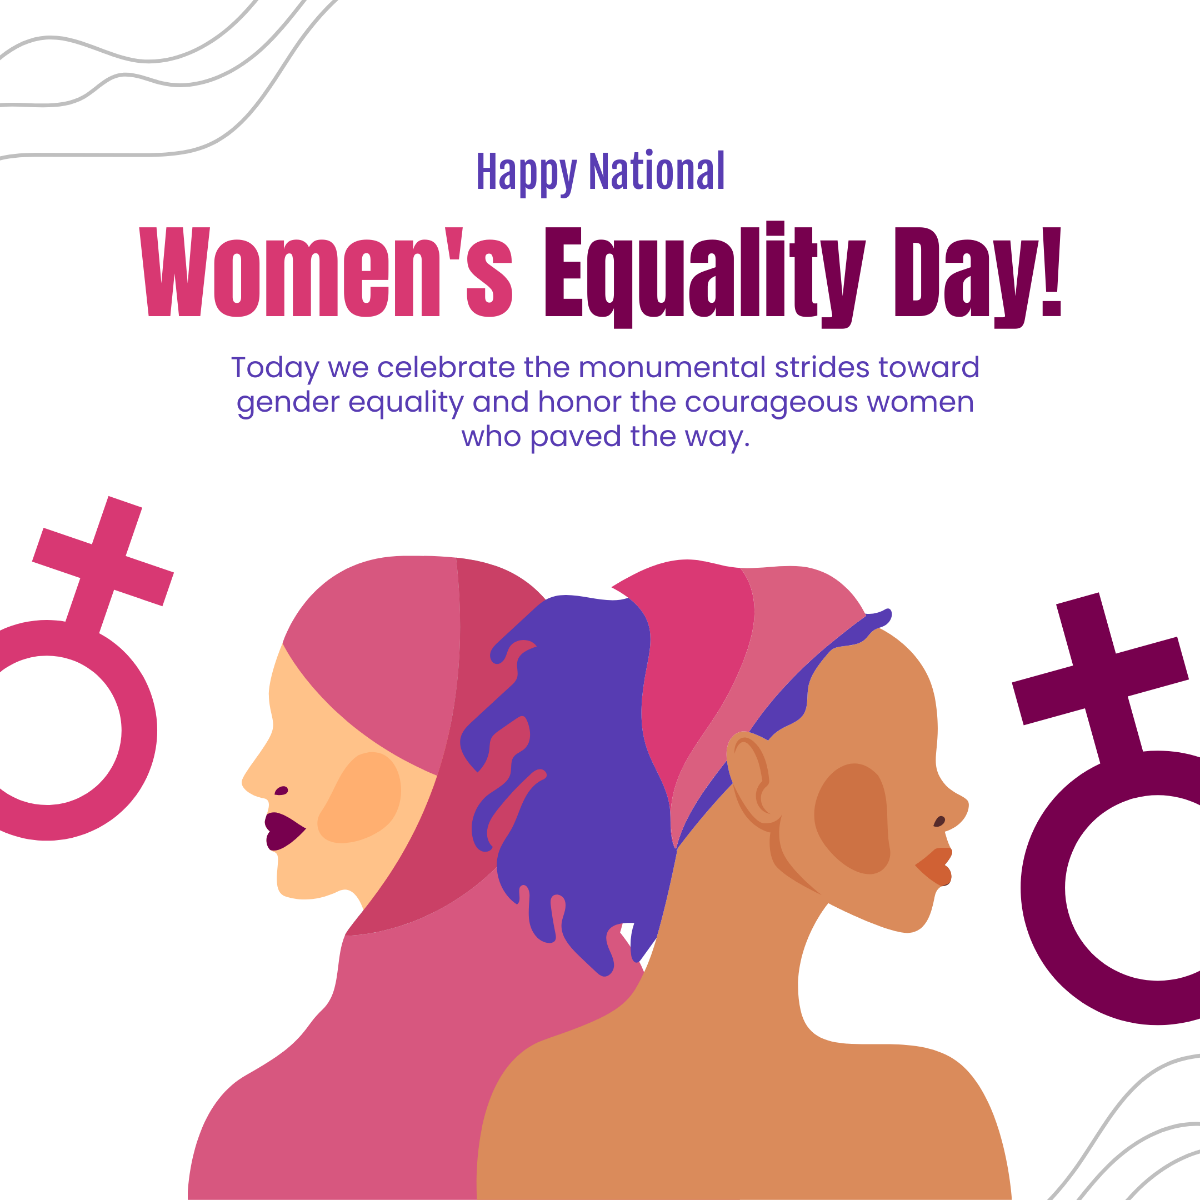 National Women's Equality Day